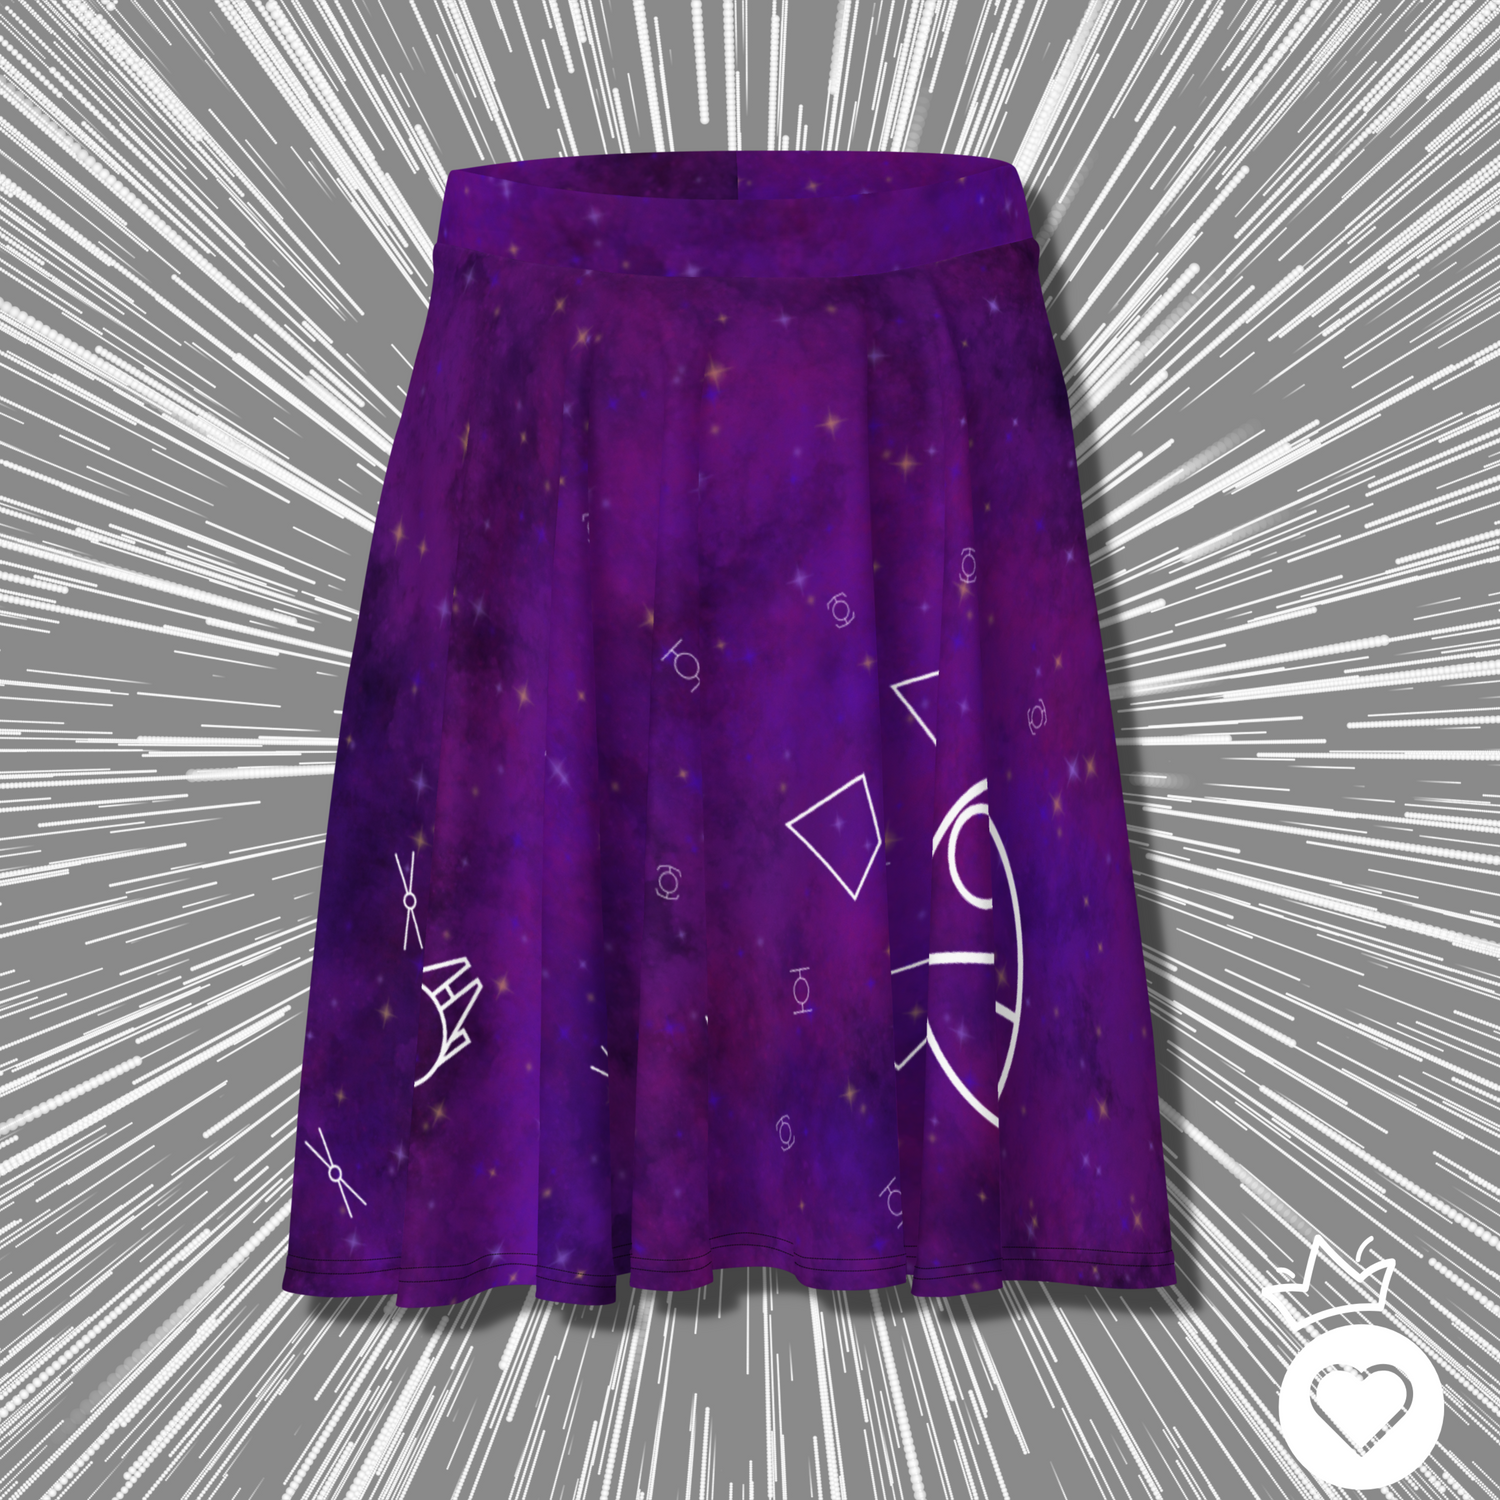 A Galaxy Far Away Skirts and Dresses